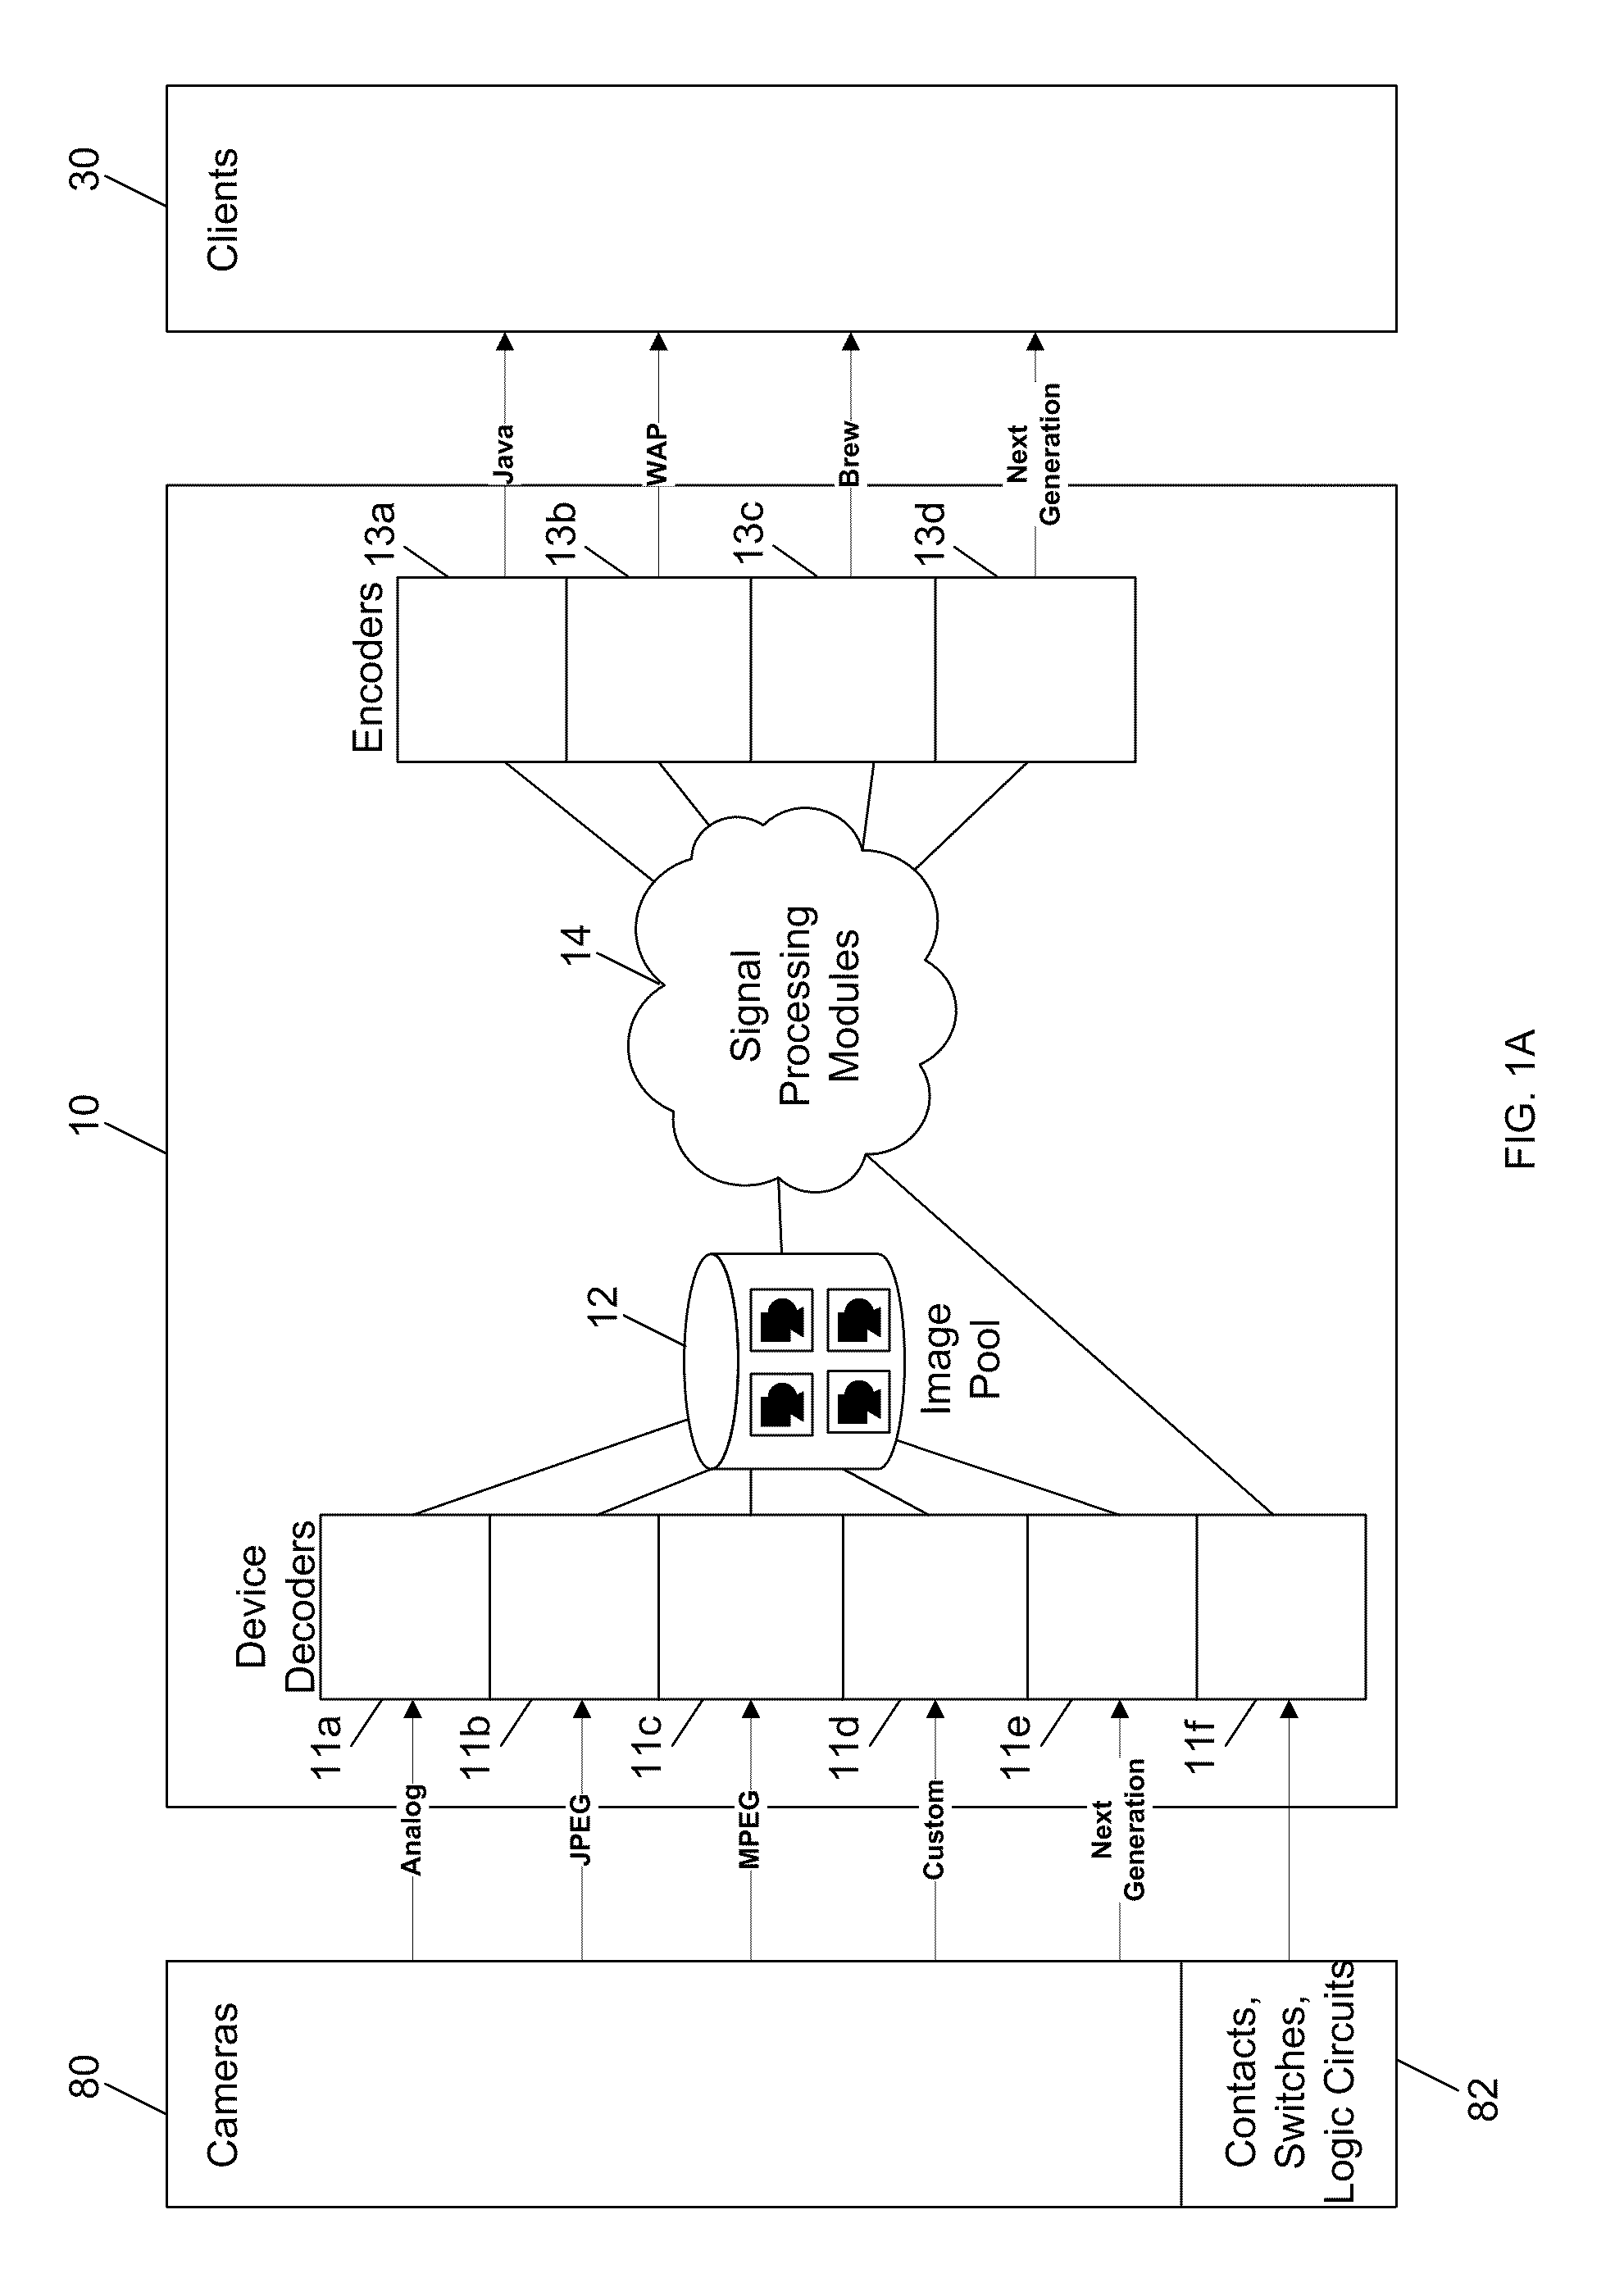 Method and Apparatus for Distributing Multimedia to Remote Clients